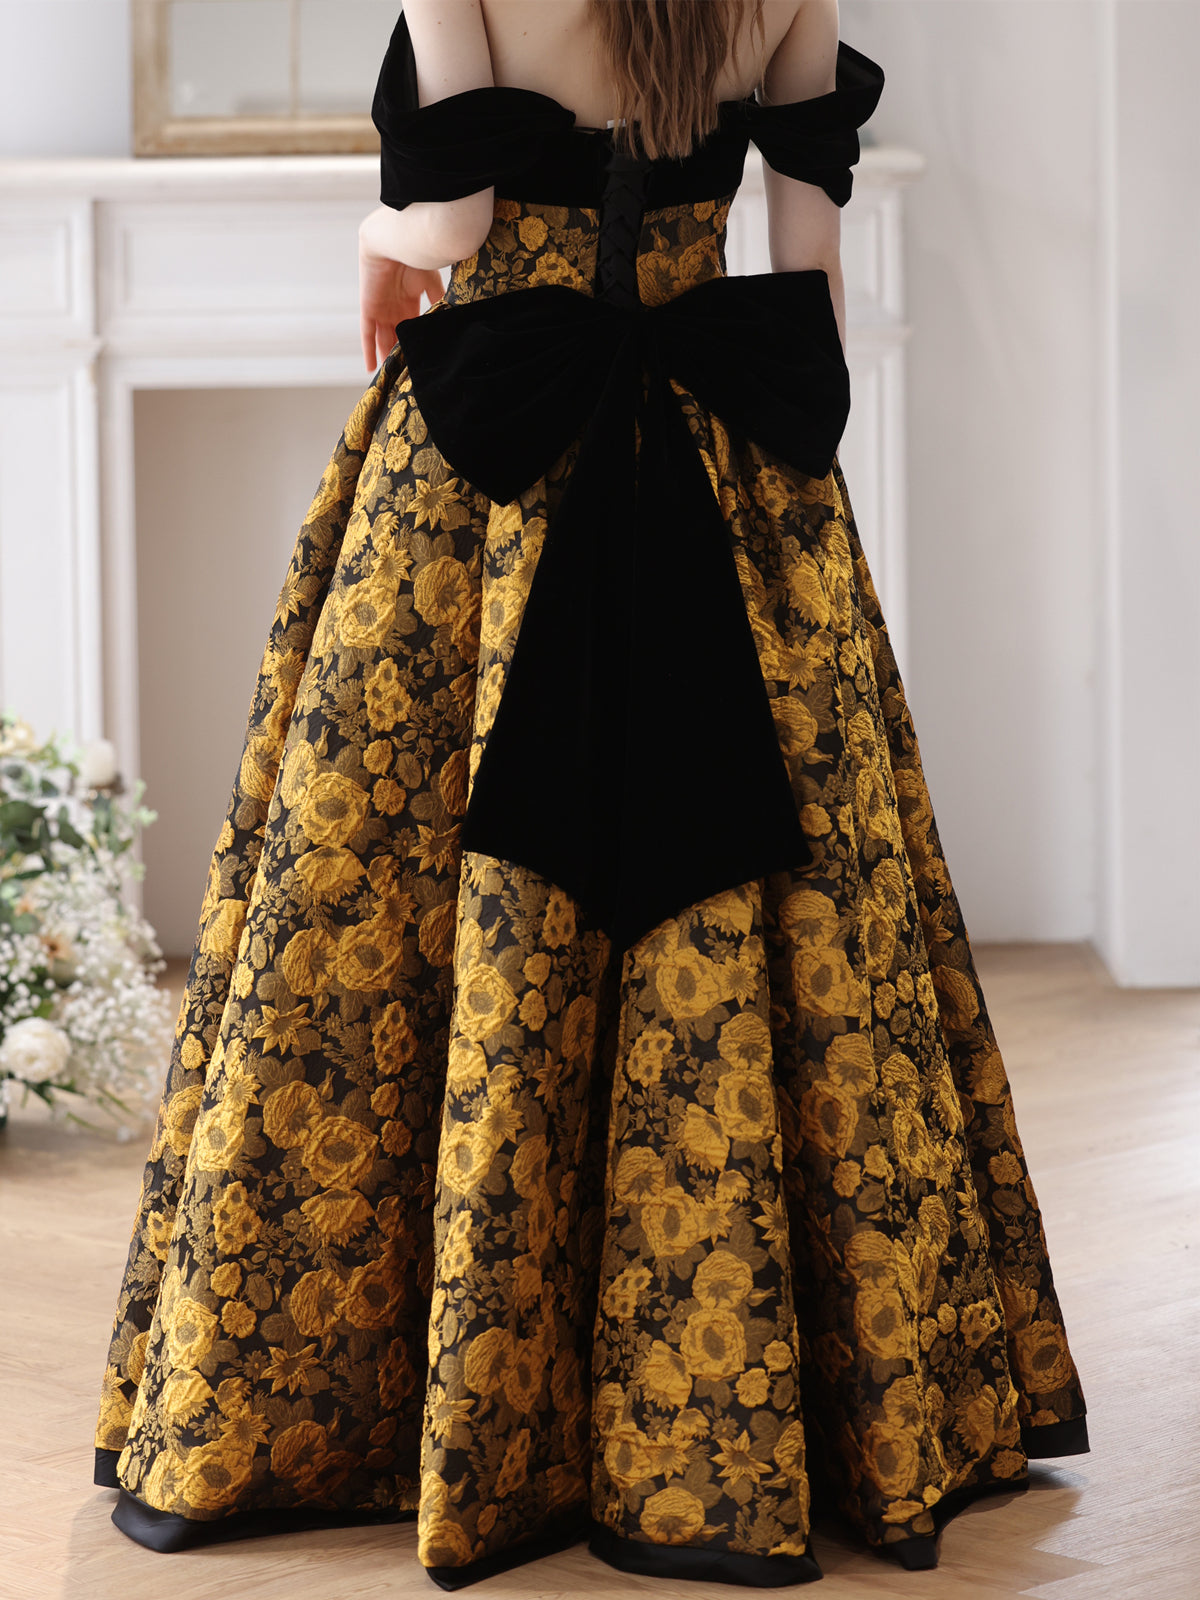 Elegant Black and Gold Floral Strapless Ball Gown with Bow Accent - Harmony Gallery